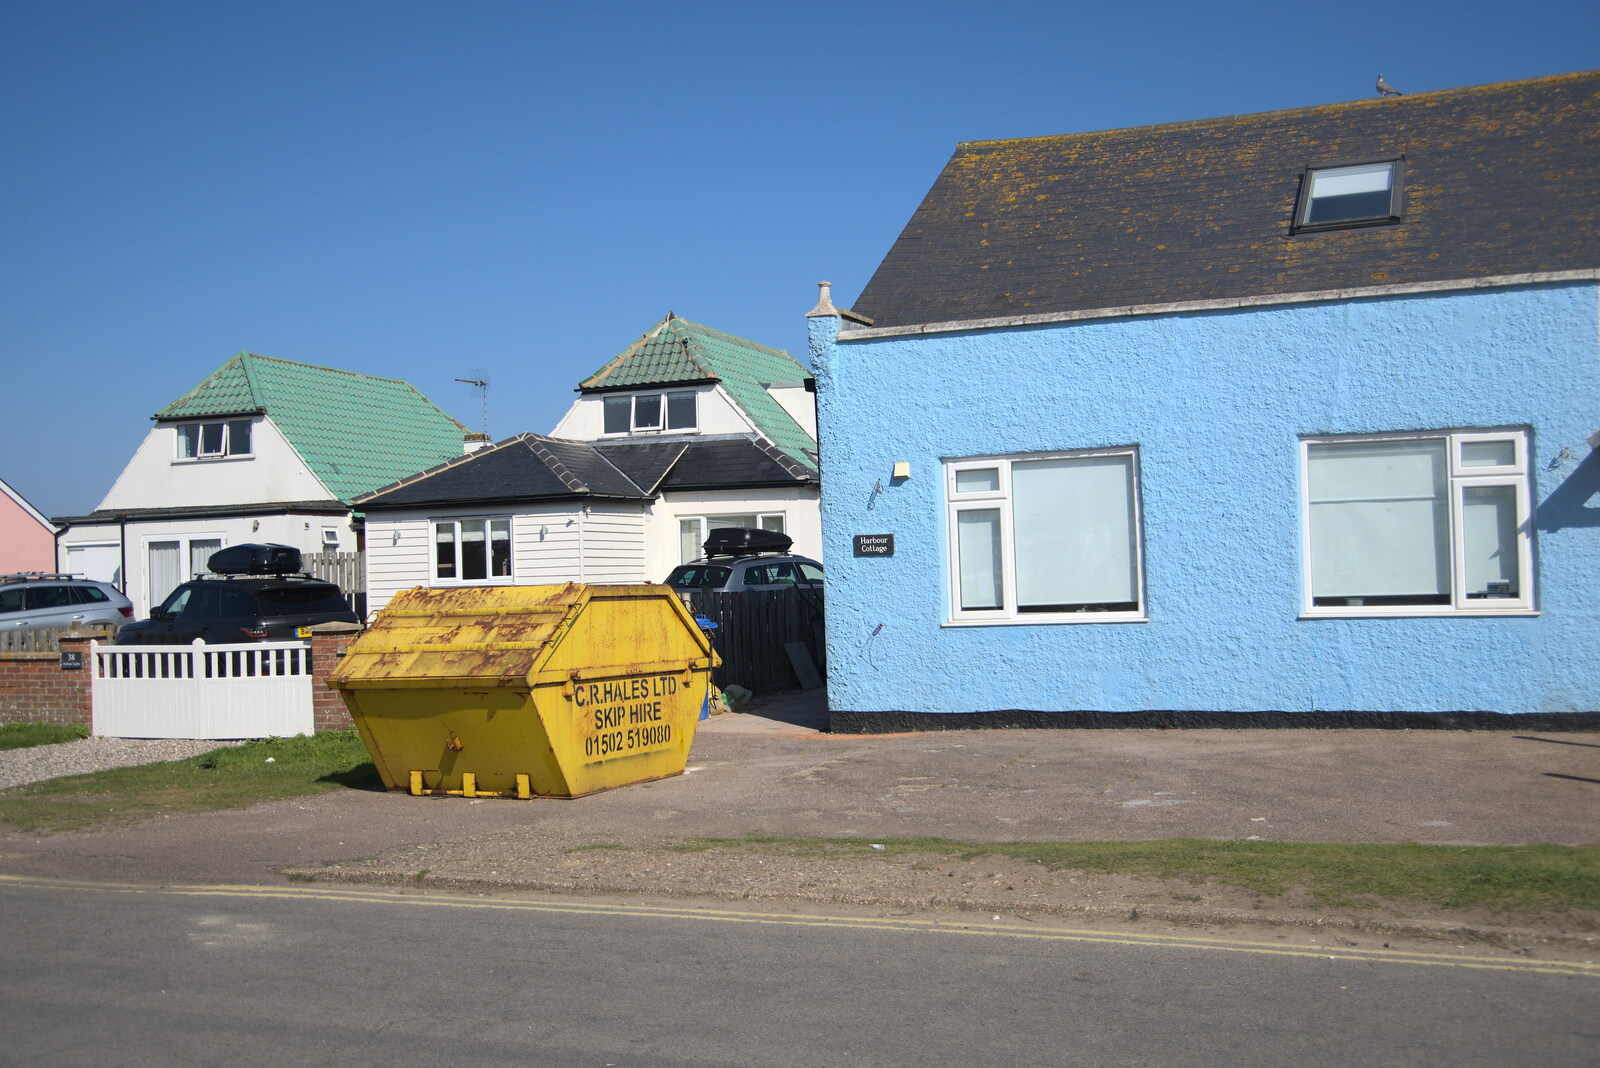 Baby-blue house and a yallow skip from A Day at the Beach with Sis, Southwold, Suffolk - 31st May 2021